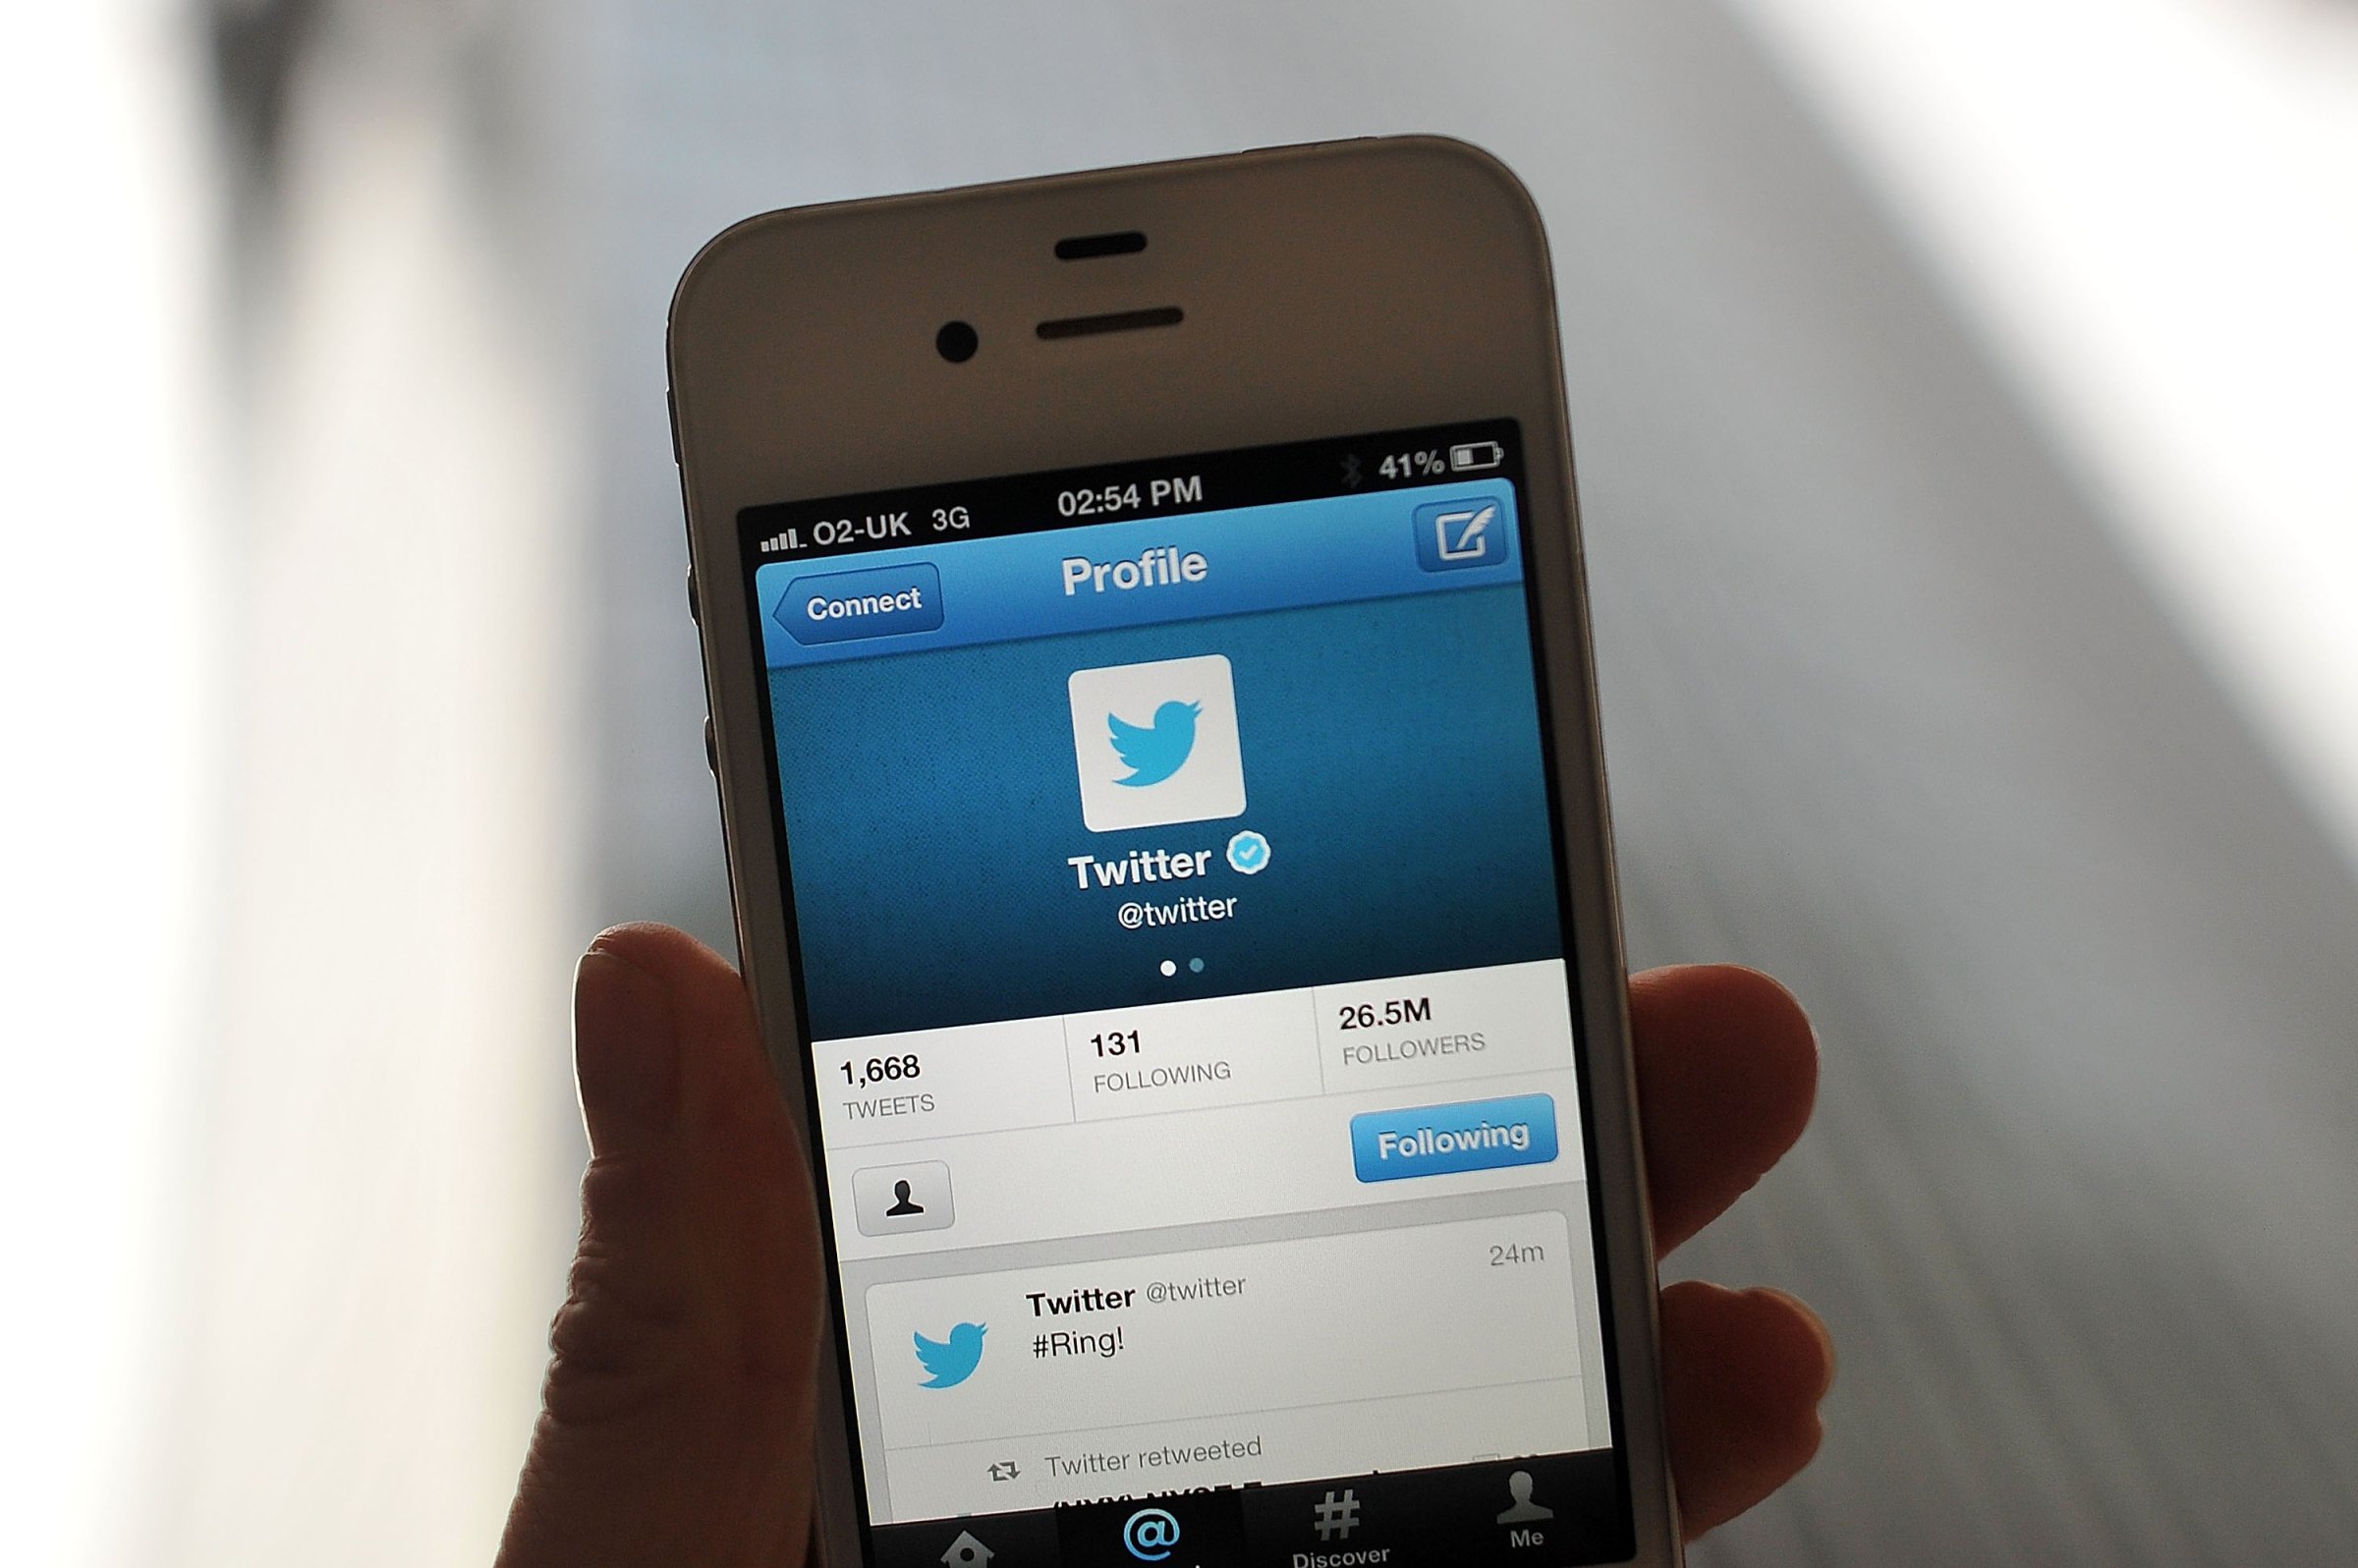 The Twitter logo and hashtag '#Ring!' is displayed on a mobile device.